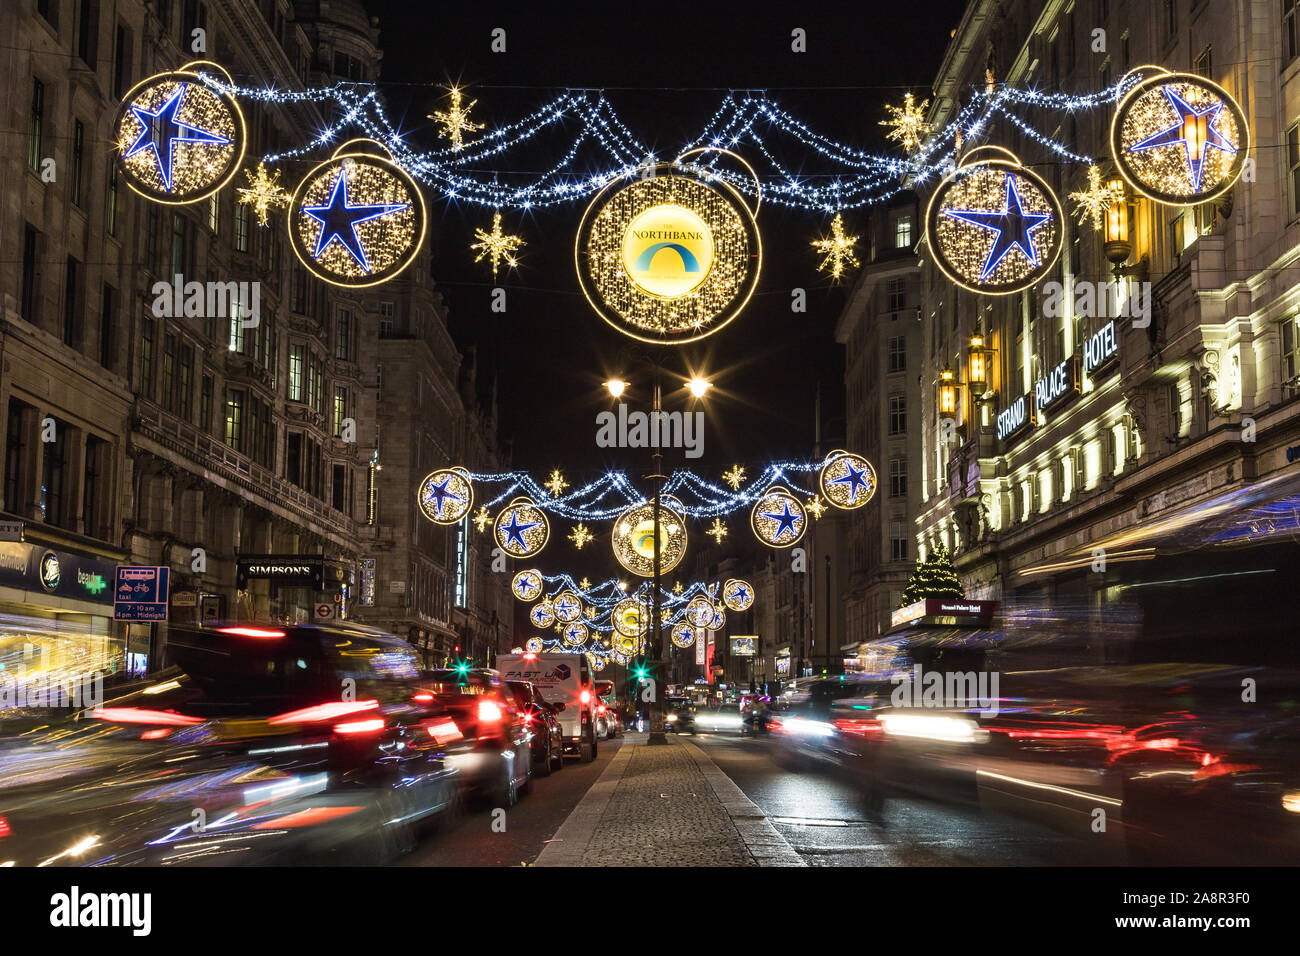 LONDON, UK - 17TH NOVEMBER 2018: A view along the Strand showing the Northbank Christmas decorations at night. Stock Photo